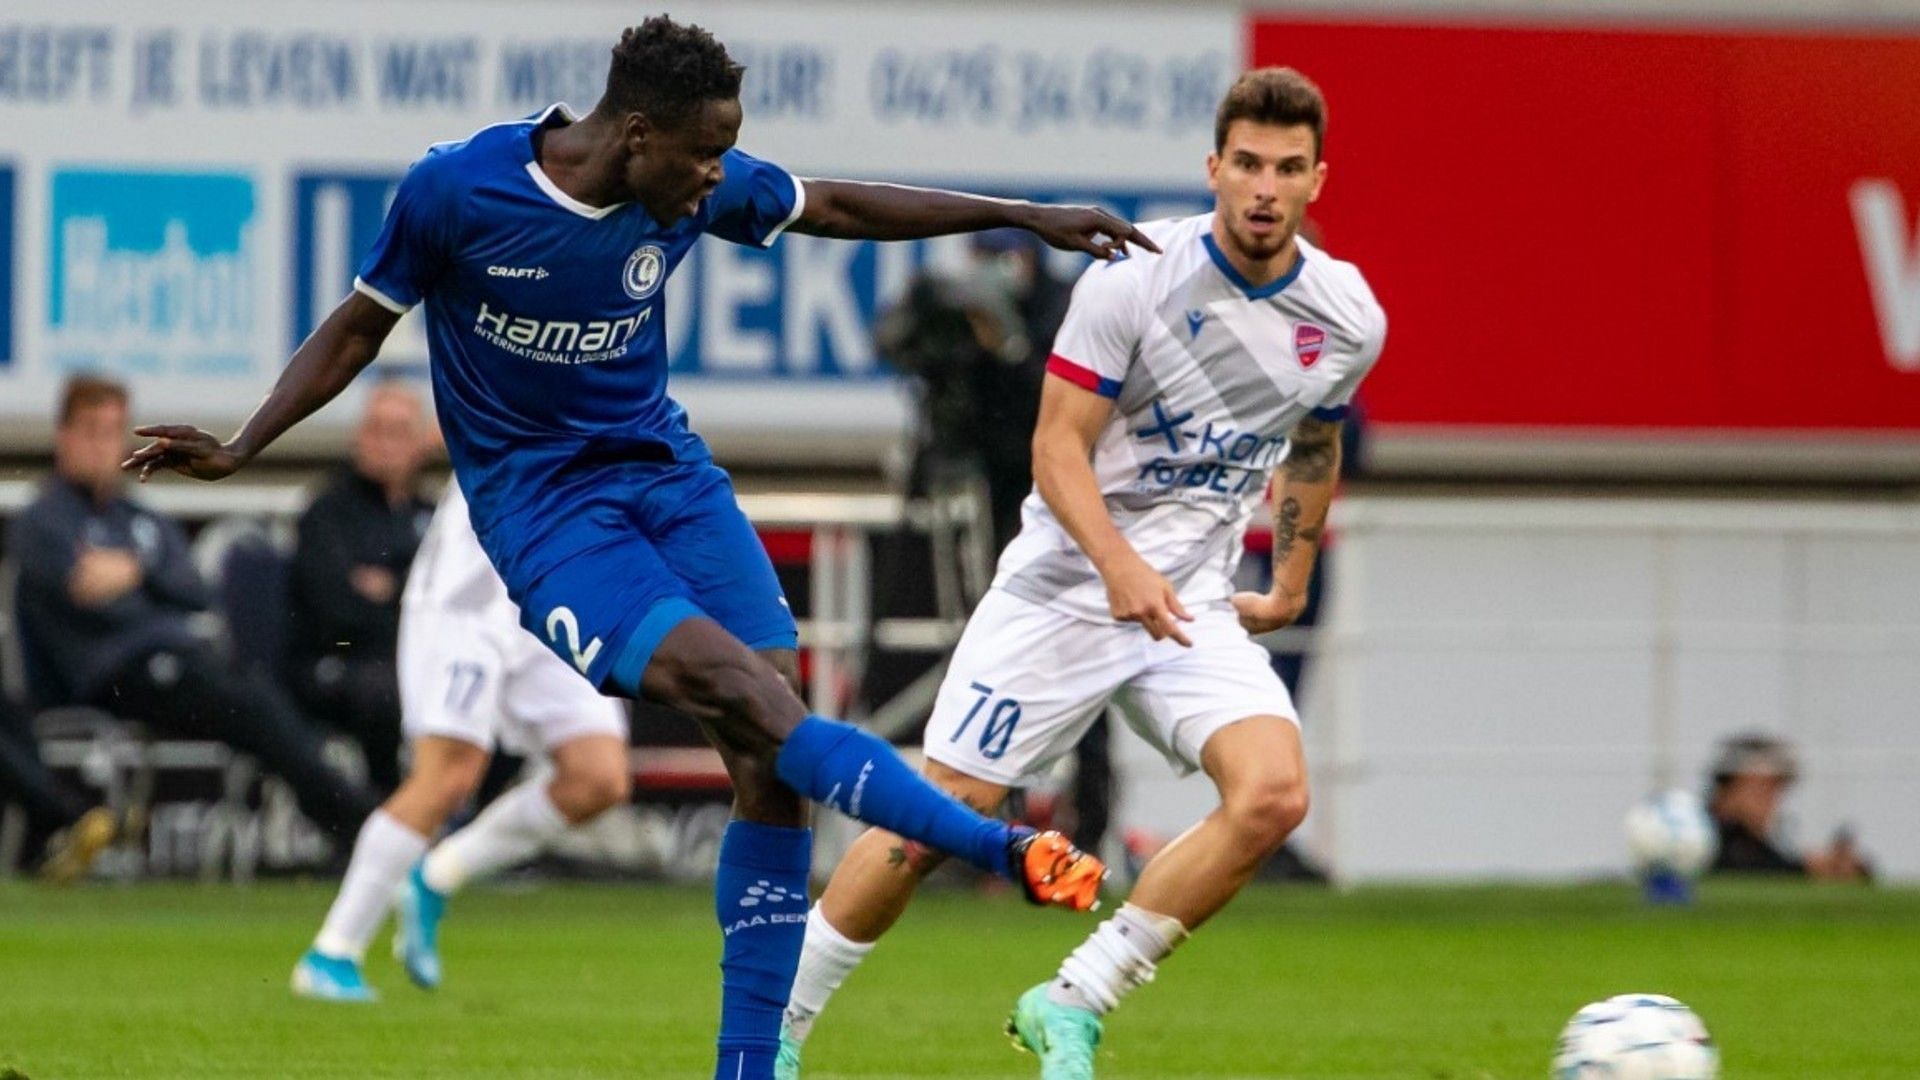 Gent take on Cercle Brugge in Belgian Pro League on Sunday